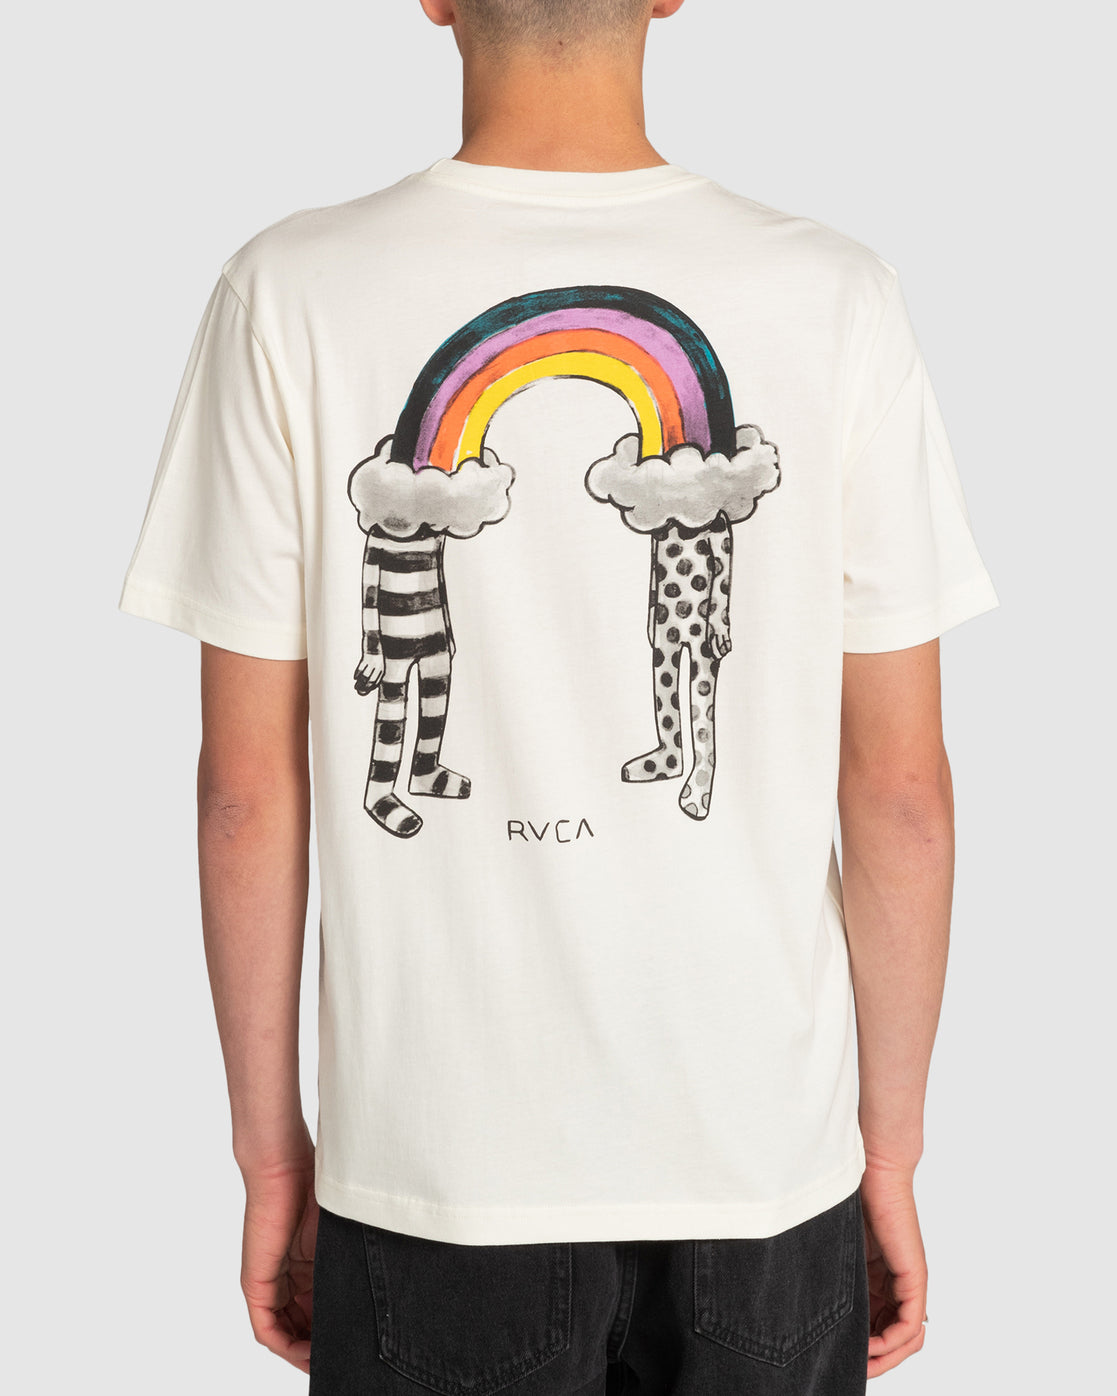 RVCA RAINBOW CONNECTION SS TEE - Antique White